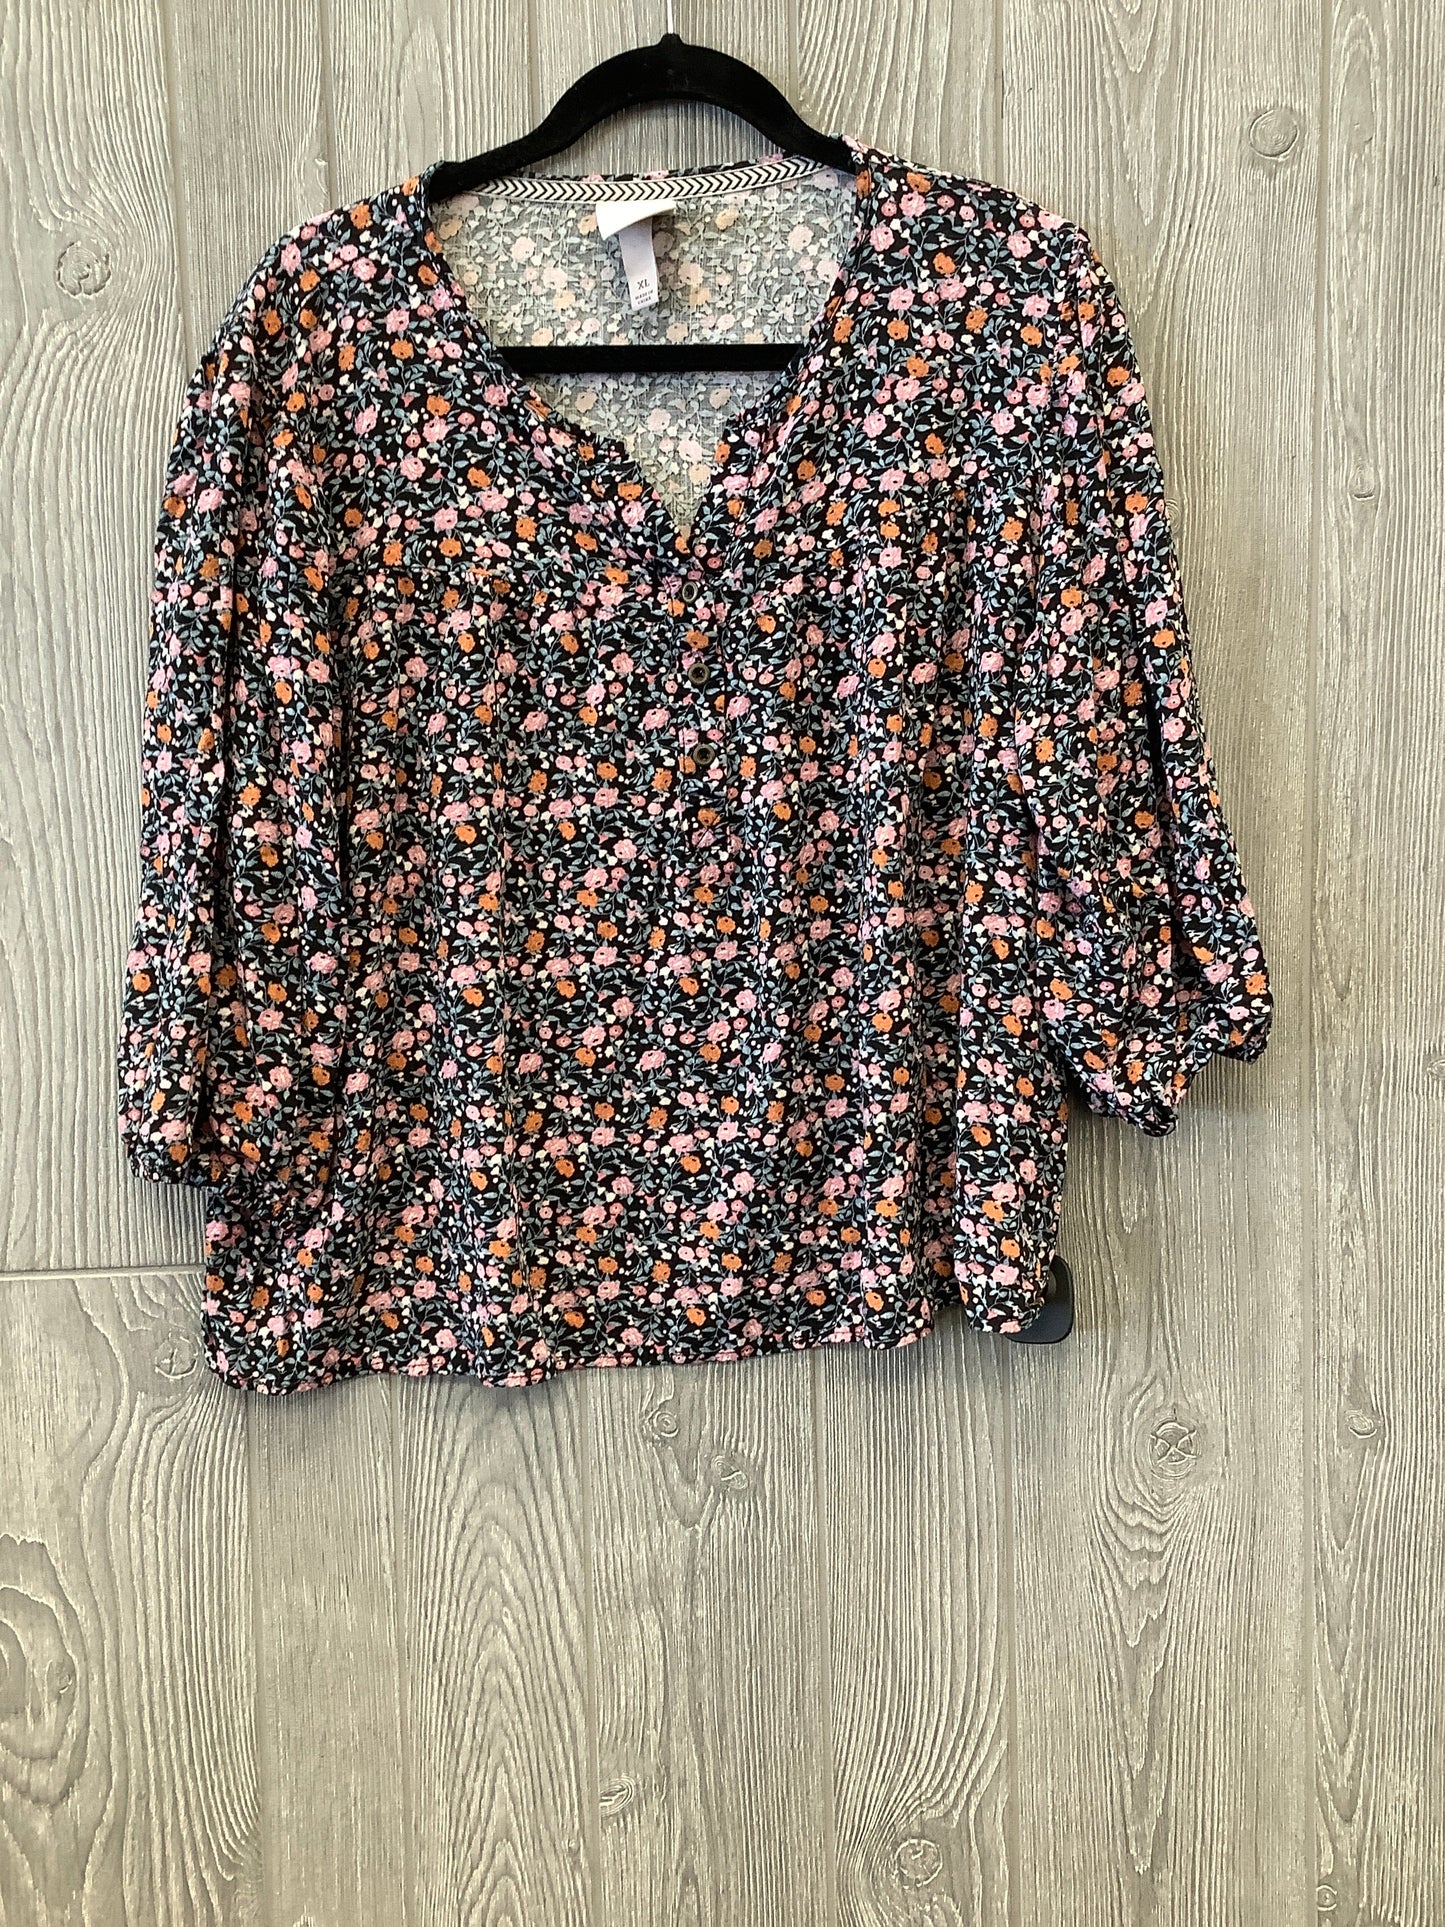 Floral Print Top 3/4 Sleeve Knox Rose, Size Xl